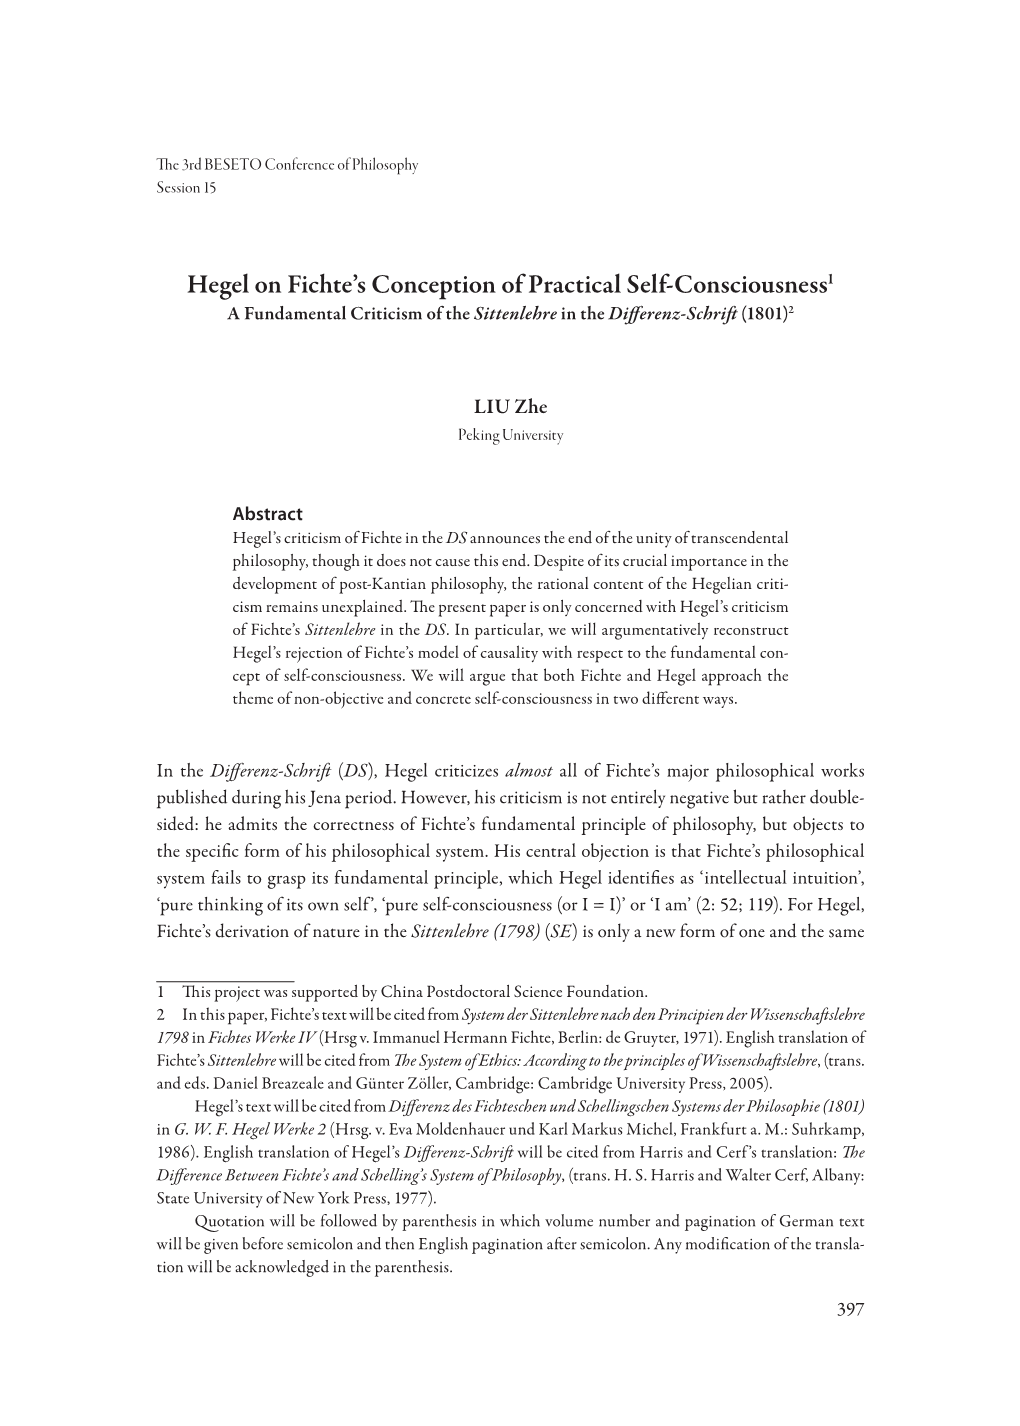 Hegel on Fichte's Conception of Practical Self-Consciousness1